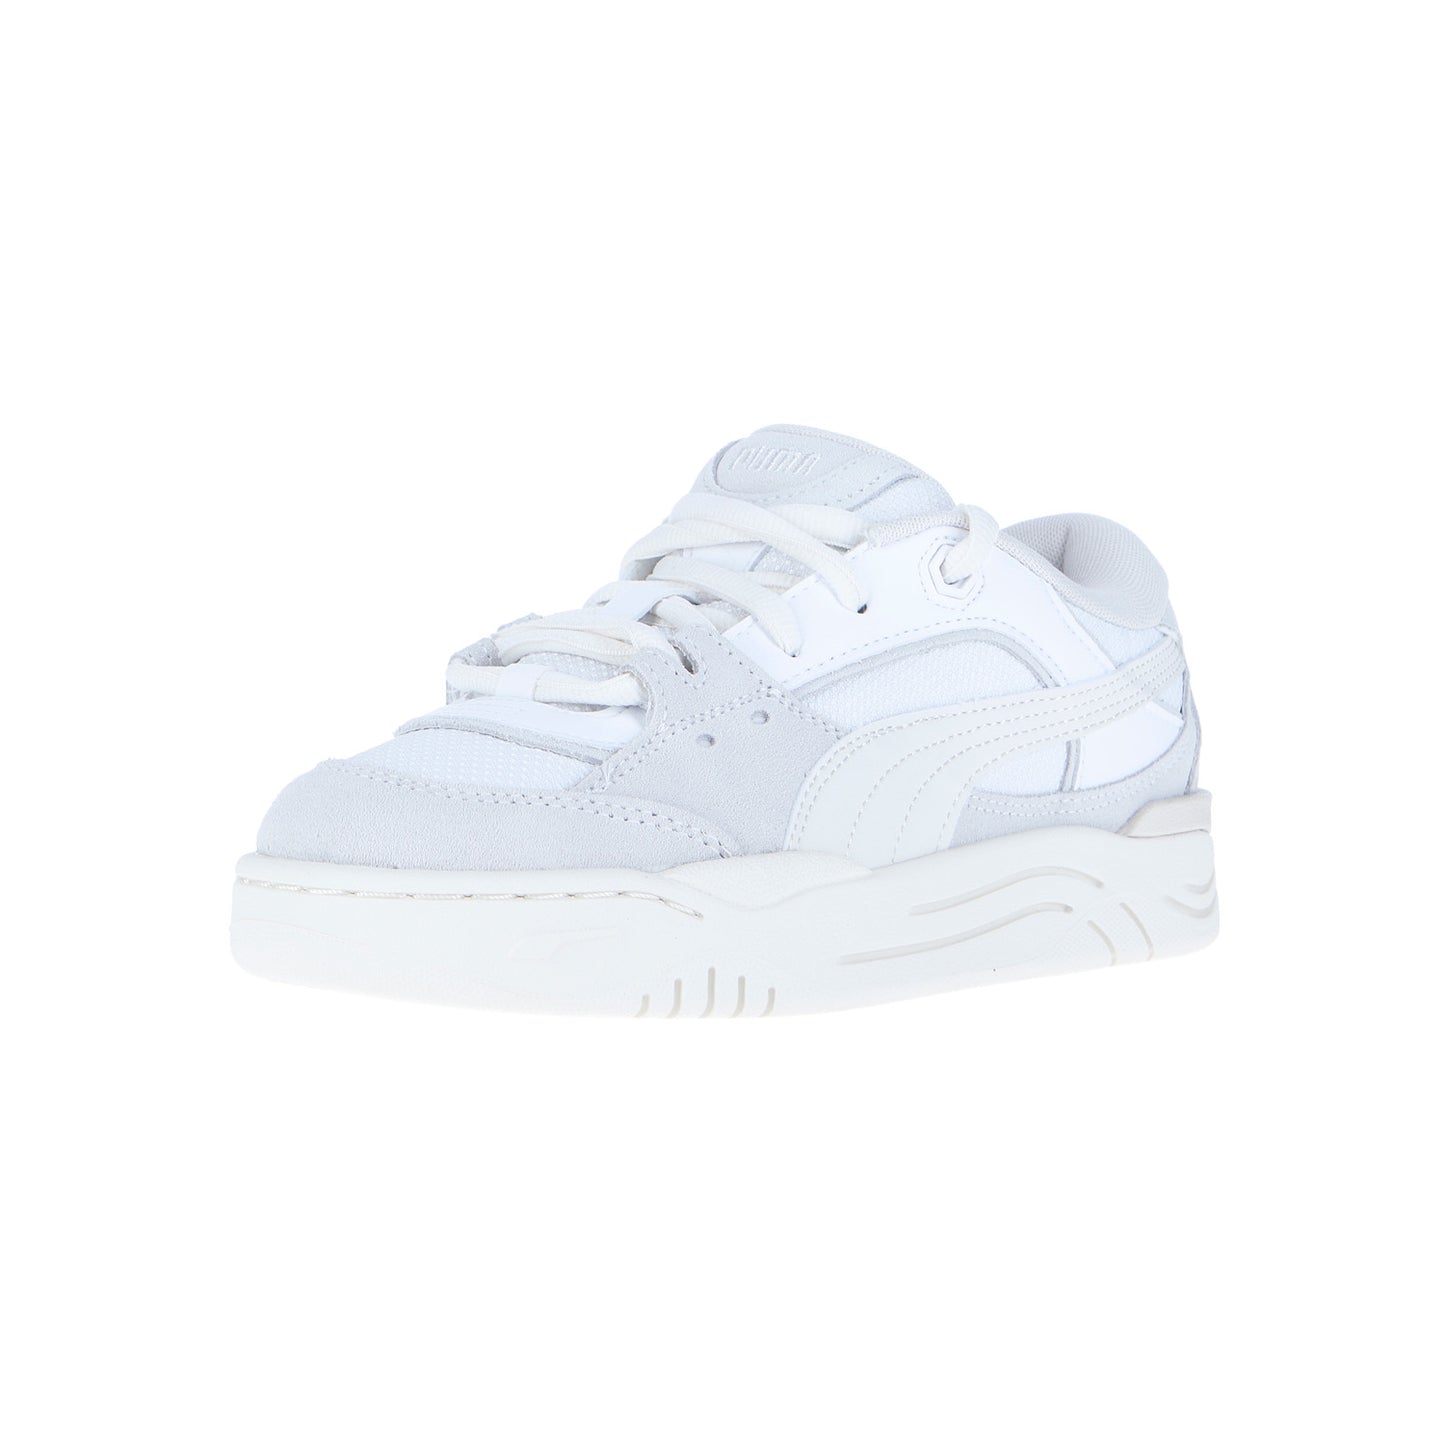 Puma-180 White/Frosted Ivory